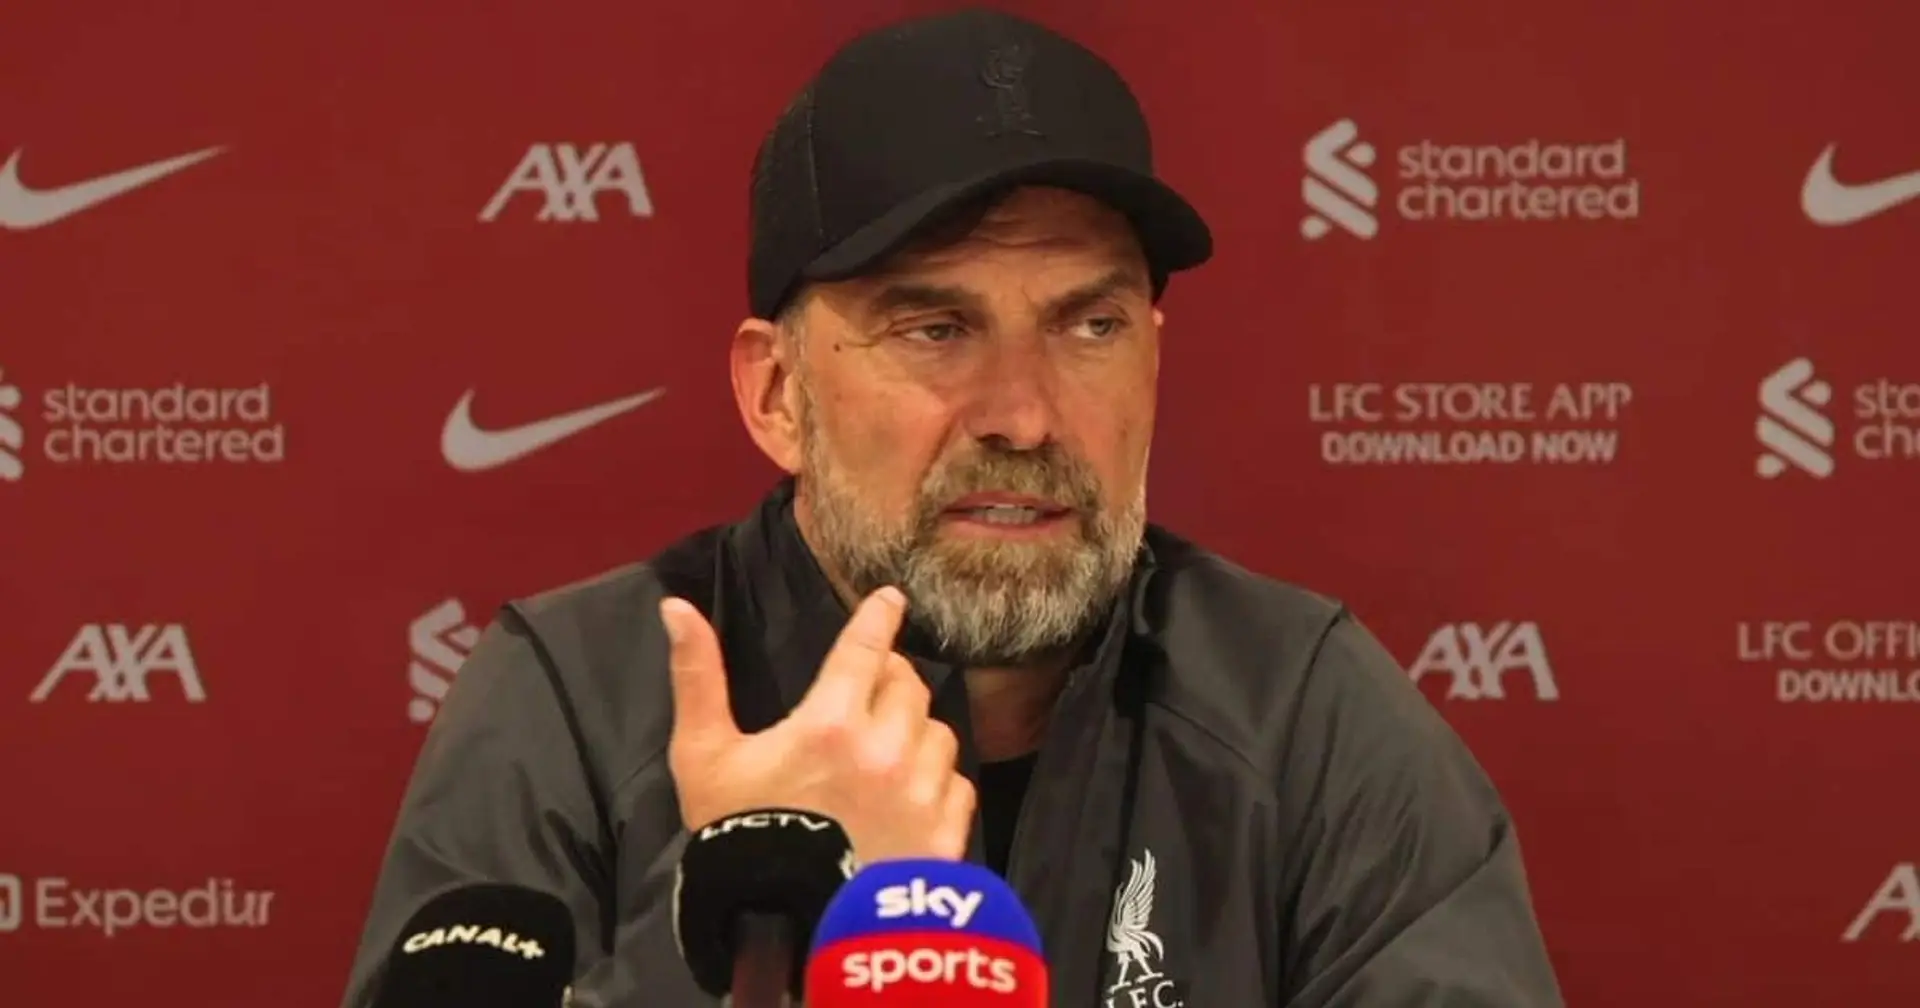 'It seems to be really strange what I did': Klopp on whether he is having second thoughts about leaving 